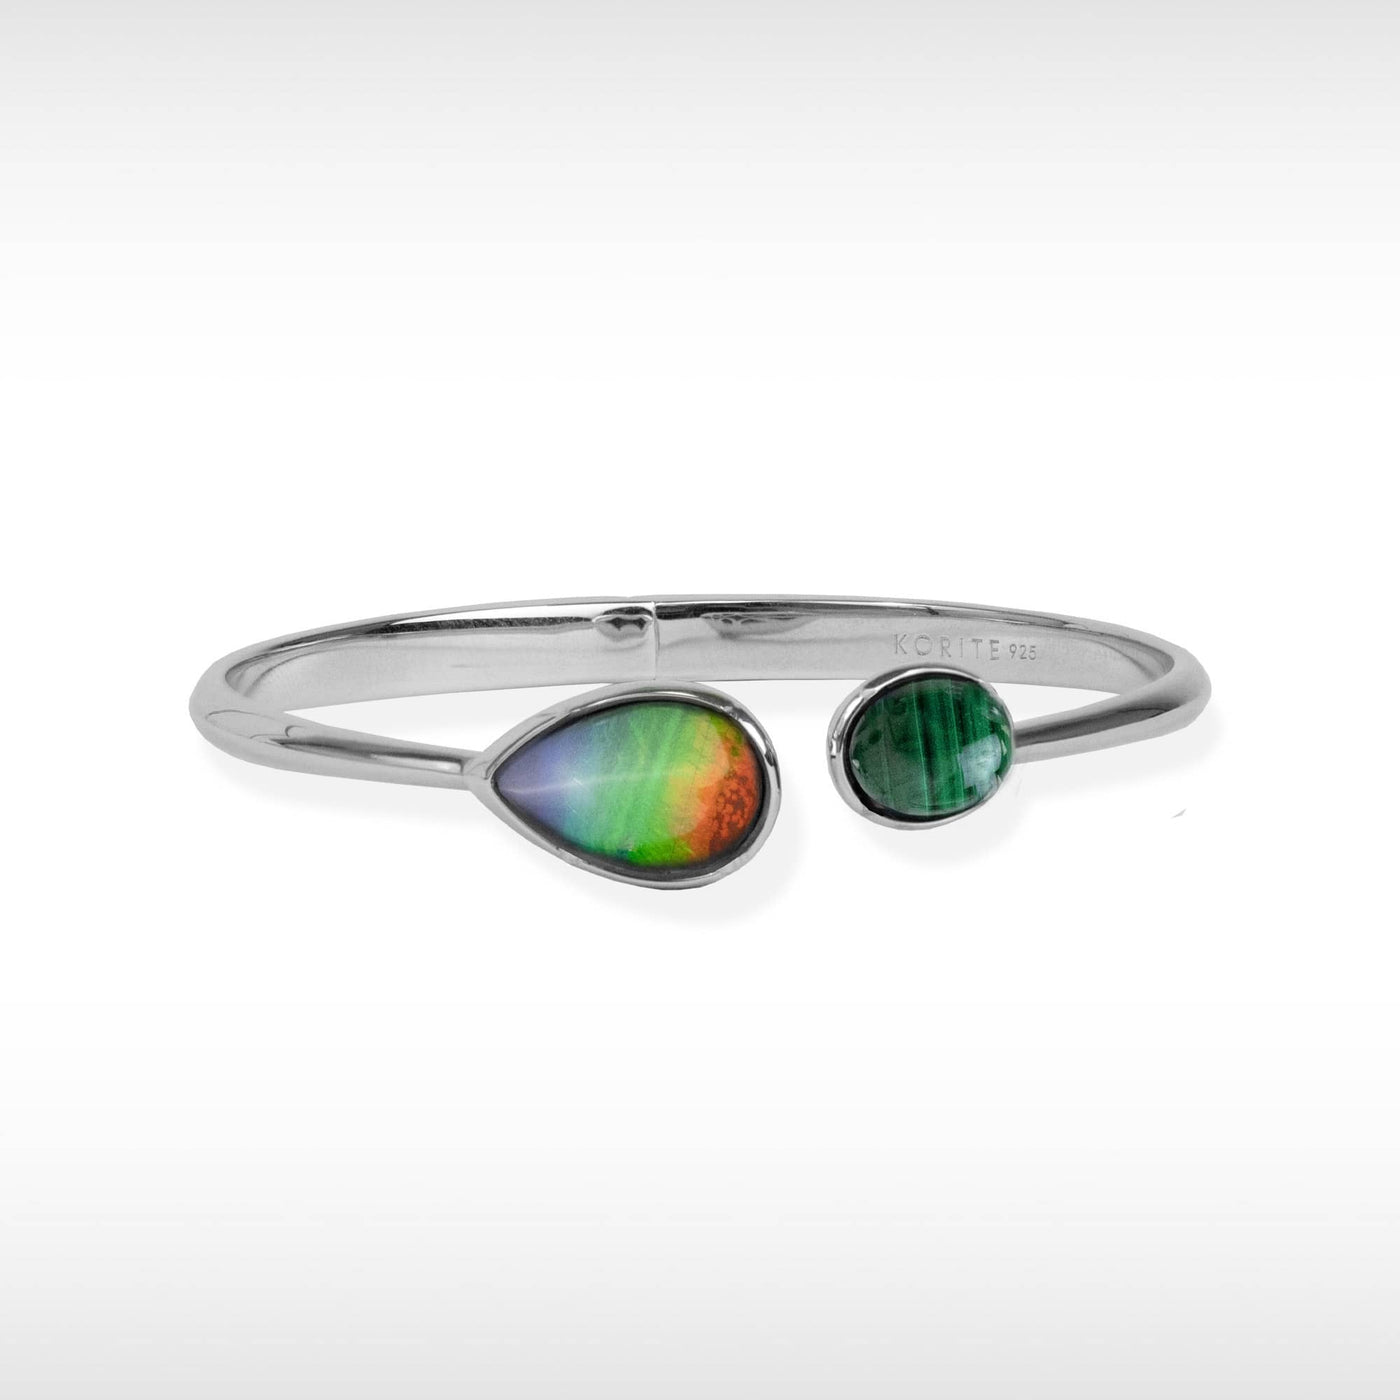 Harmony ammolite bangle in sterling silver with malachite